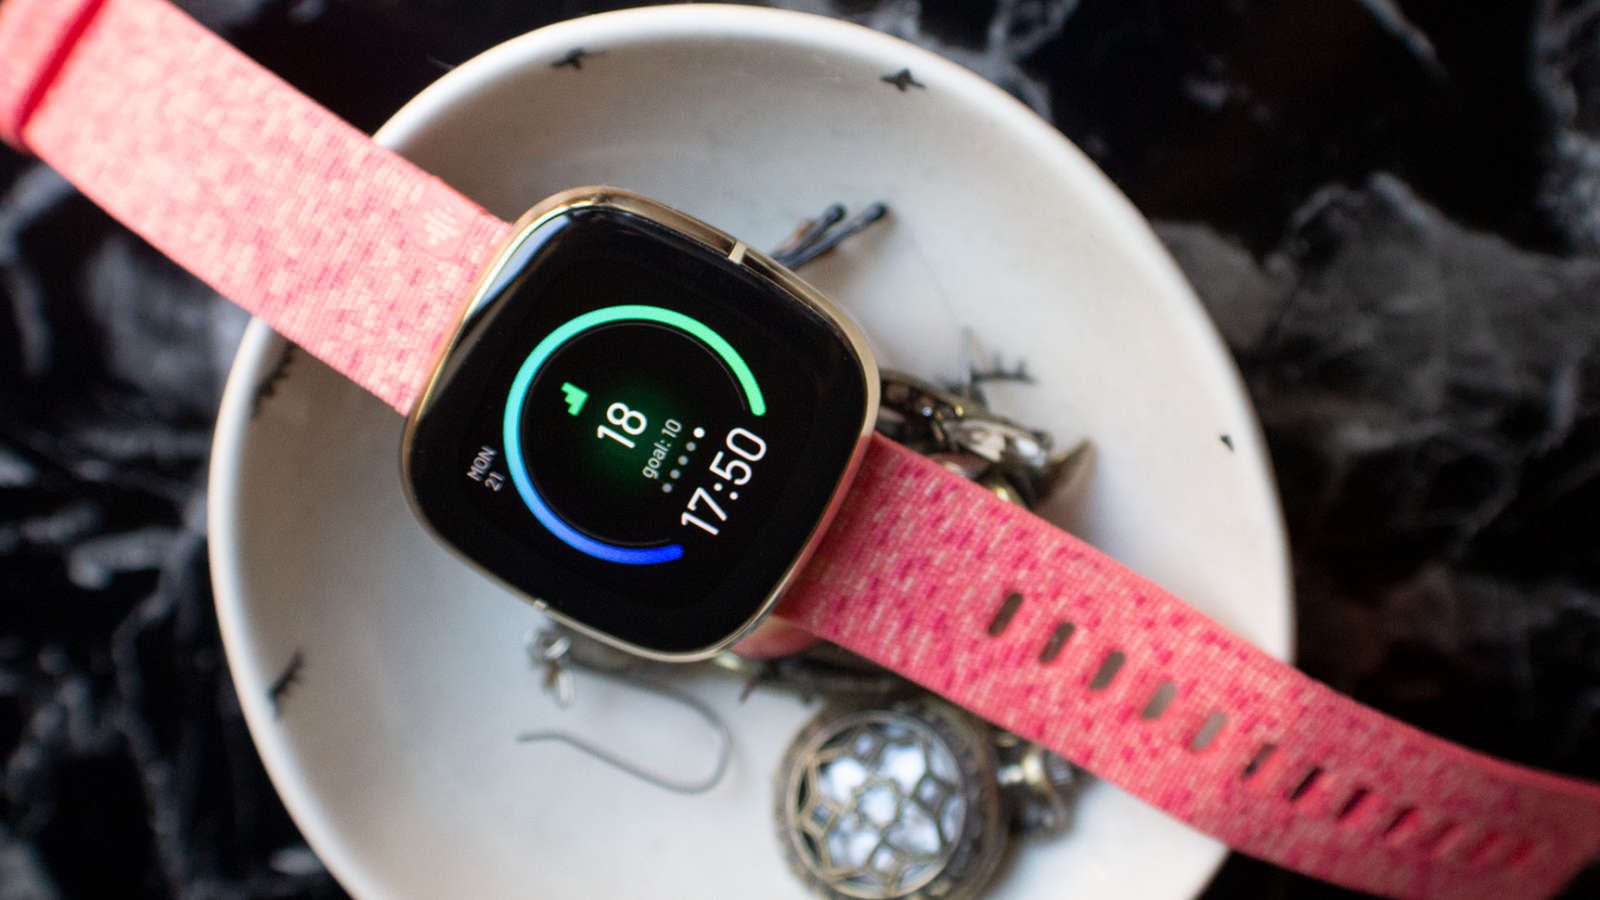 How to Listen to Your Music on Any Smartwatch